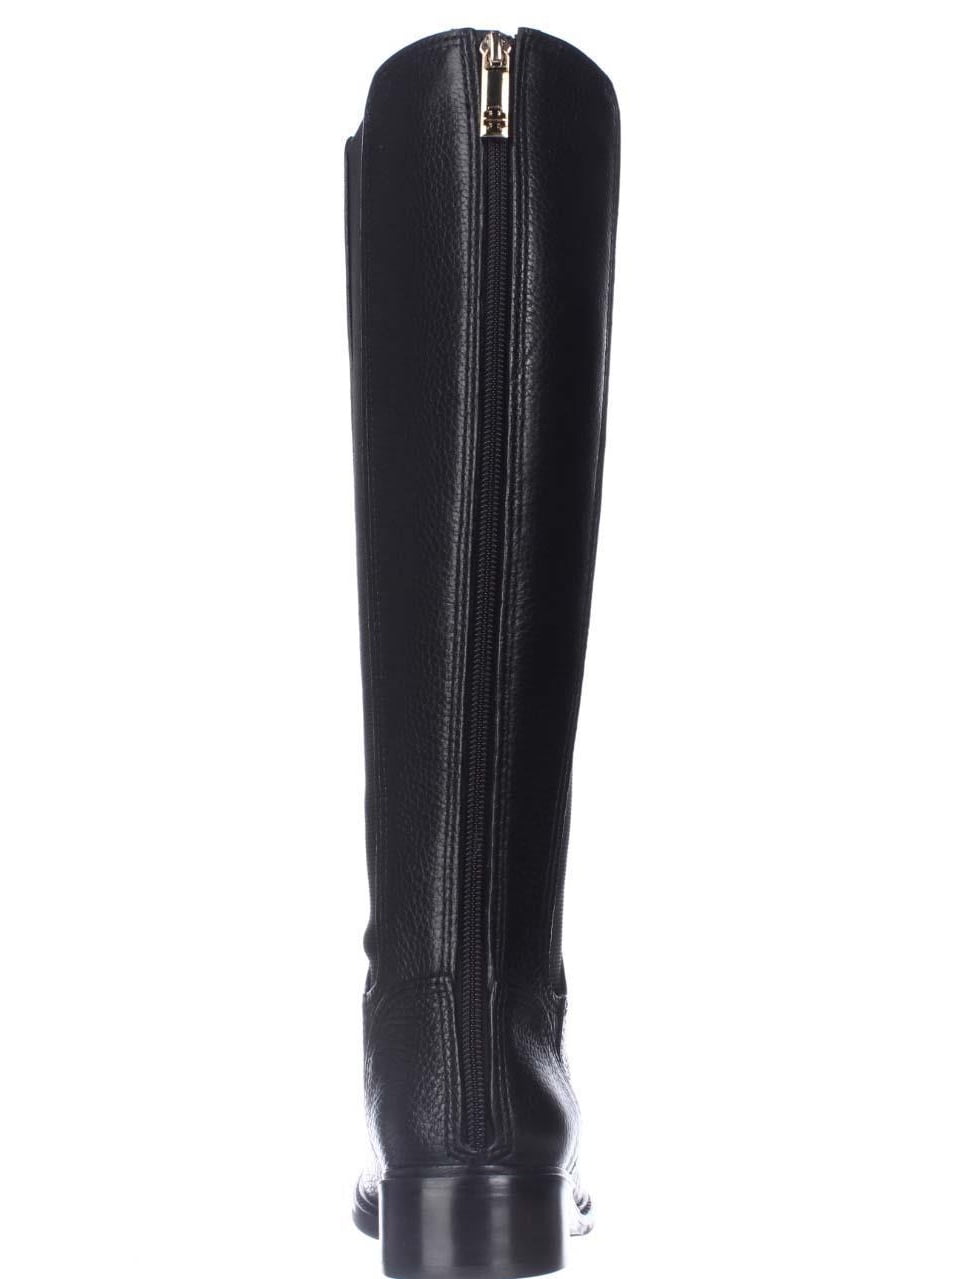 Howdy Slim! Riding Boots for Thin Calves: Tory Burch Christy